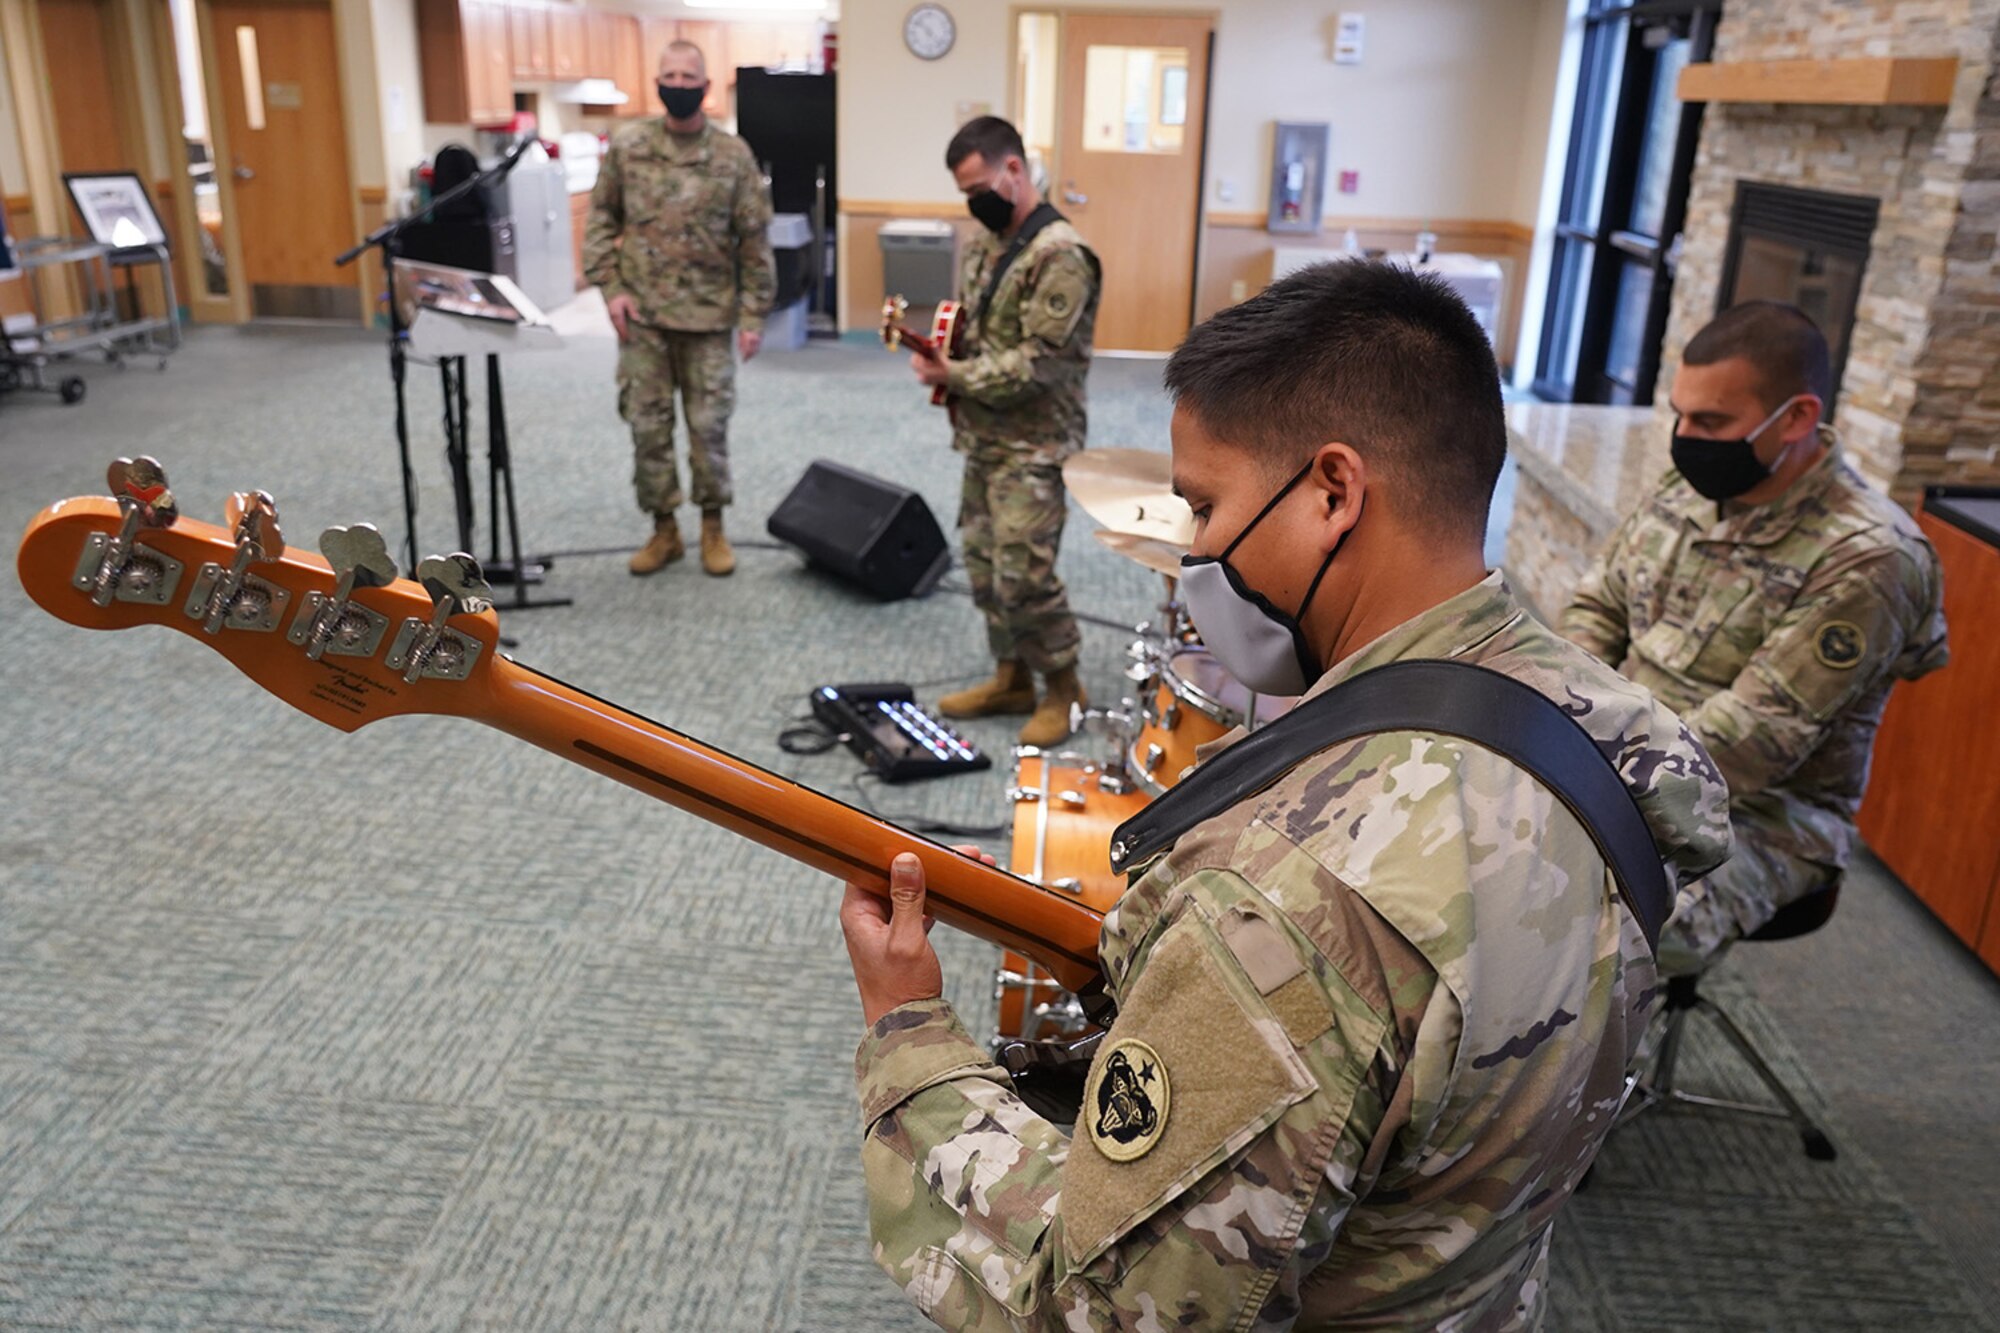 Army Sgt. Johndavid Untalan, a native of Dededo, Guam, and a bassist assigned to the 9th Army Band, 17th Combat Sustainment Support Battalion, U.S. Army Alaska, rehearses with fellow Soldiers in an open room at their unit headquarters on Joint Base Elmendorf-Richardson, Alaska, Sept. 17, 2020.